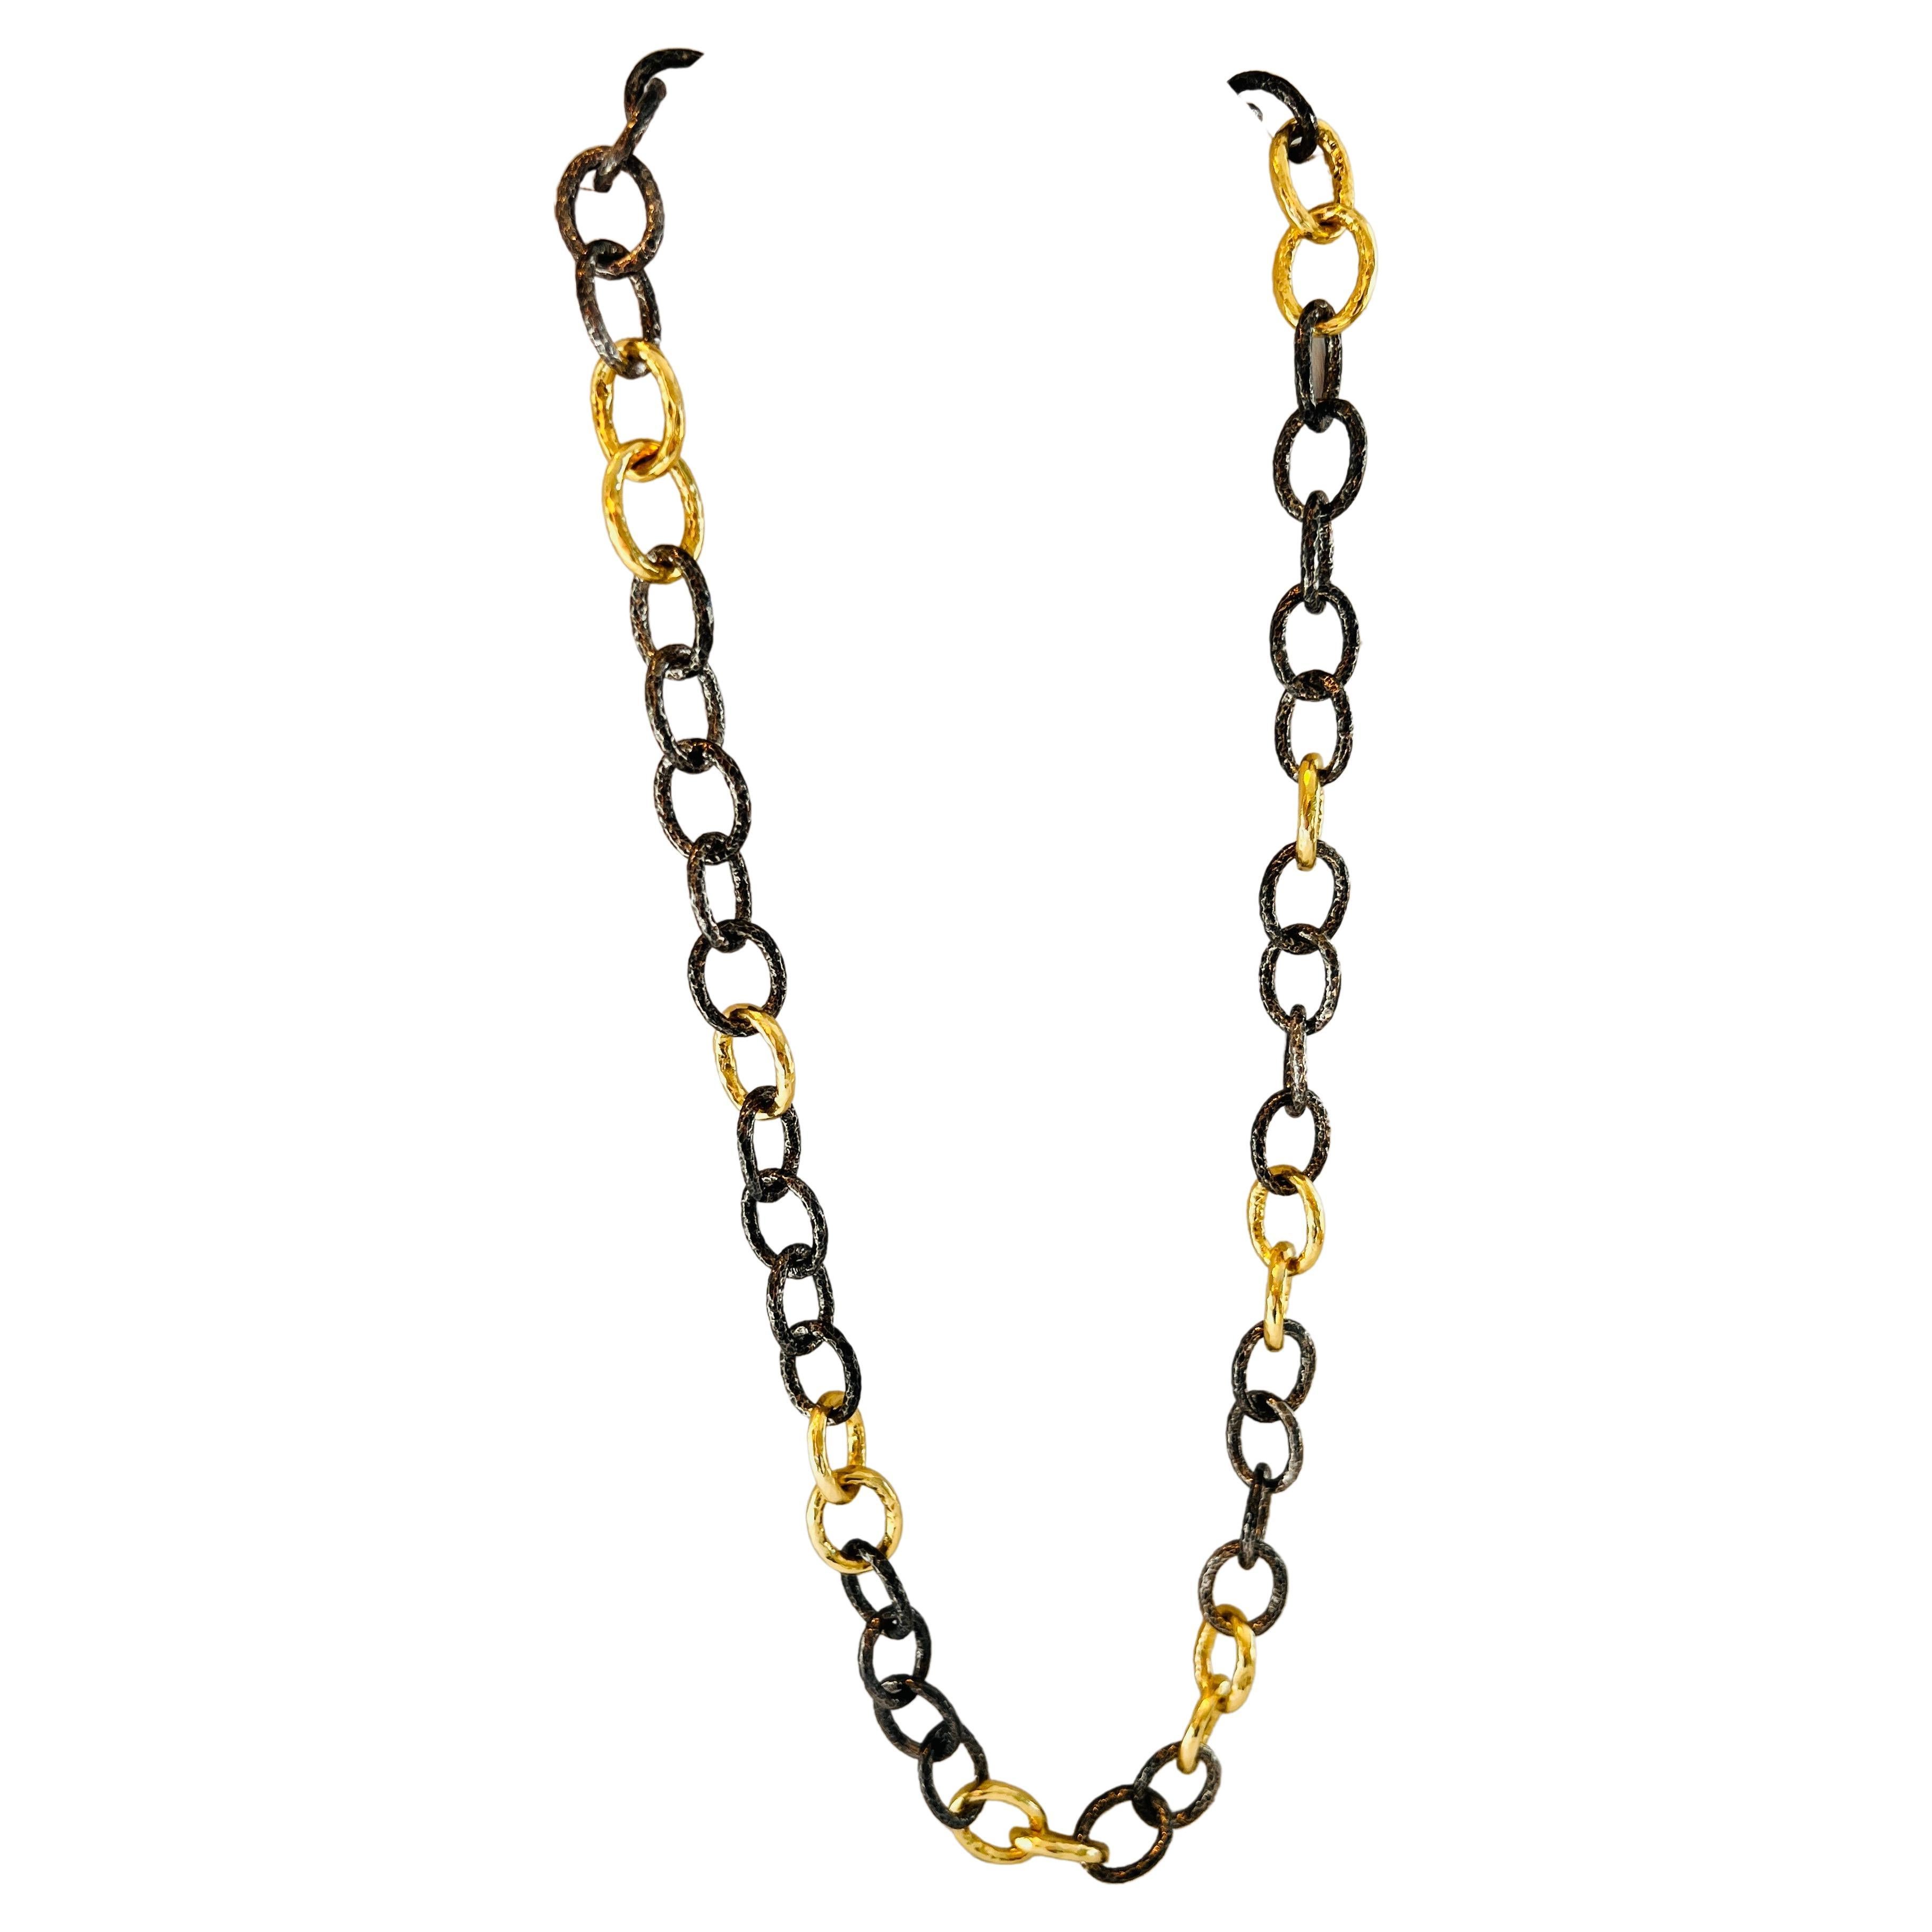 The 50/50 Blackened Silver and Gold 25" Chain Necklace, by Tagili